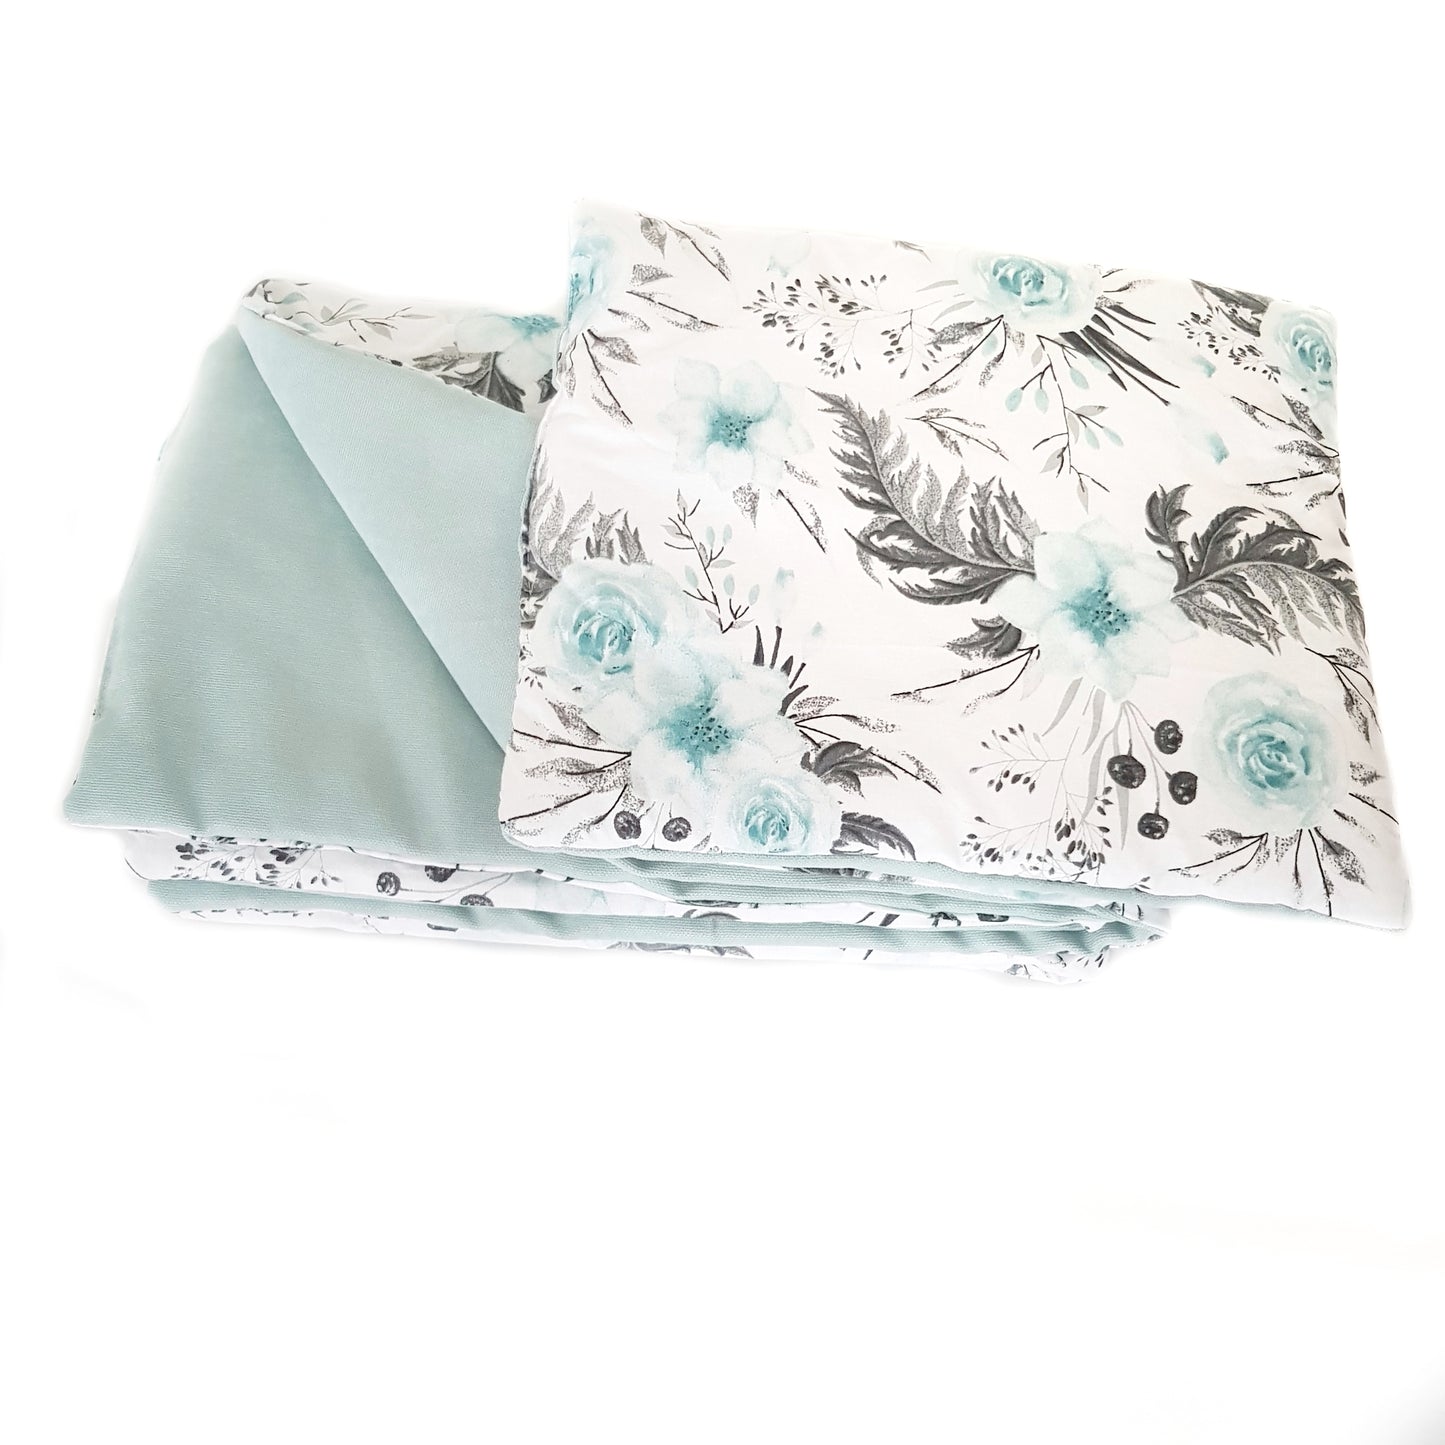 MEDIUM BLANKET AND PILLOW SET FOR BABIES BREATHABLE WARM